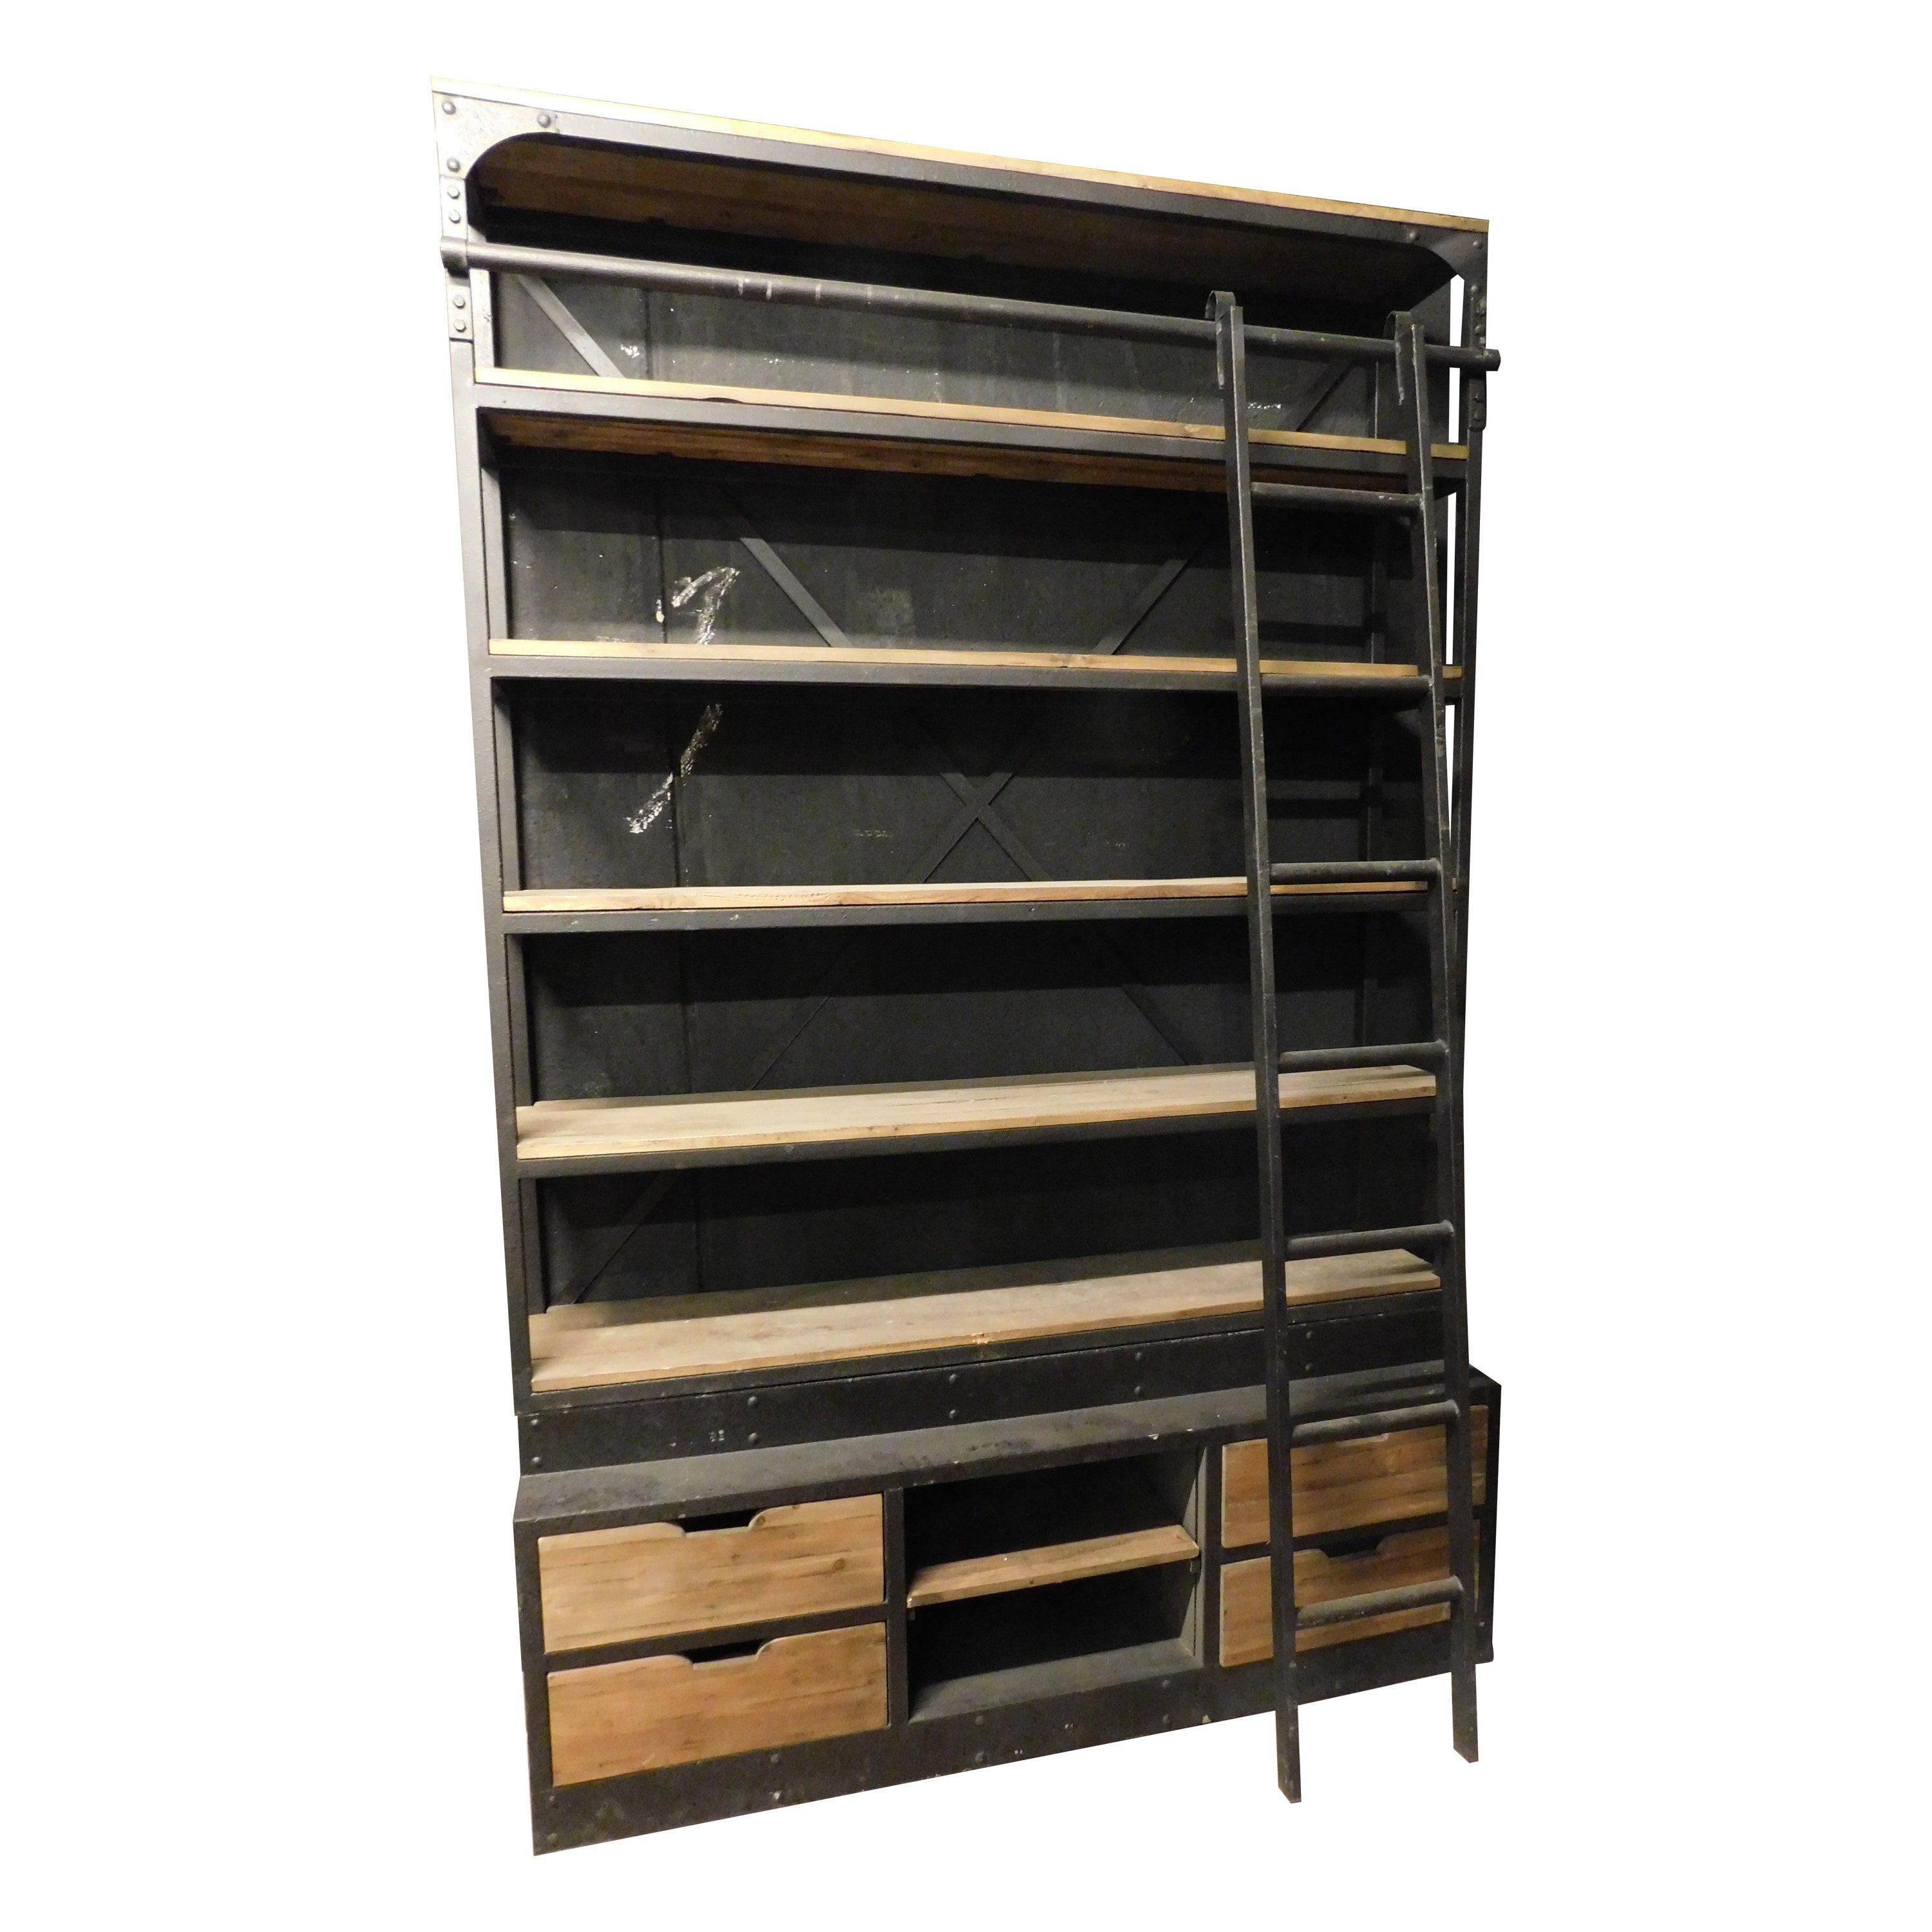 Industrial iron bookcase with wooden shelves and drawers complete with ladder For Sale